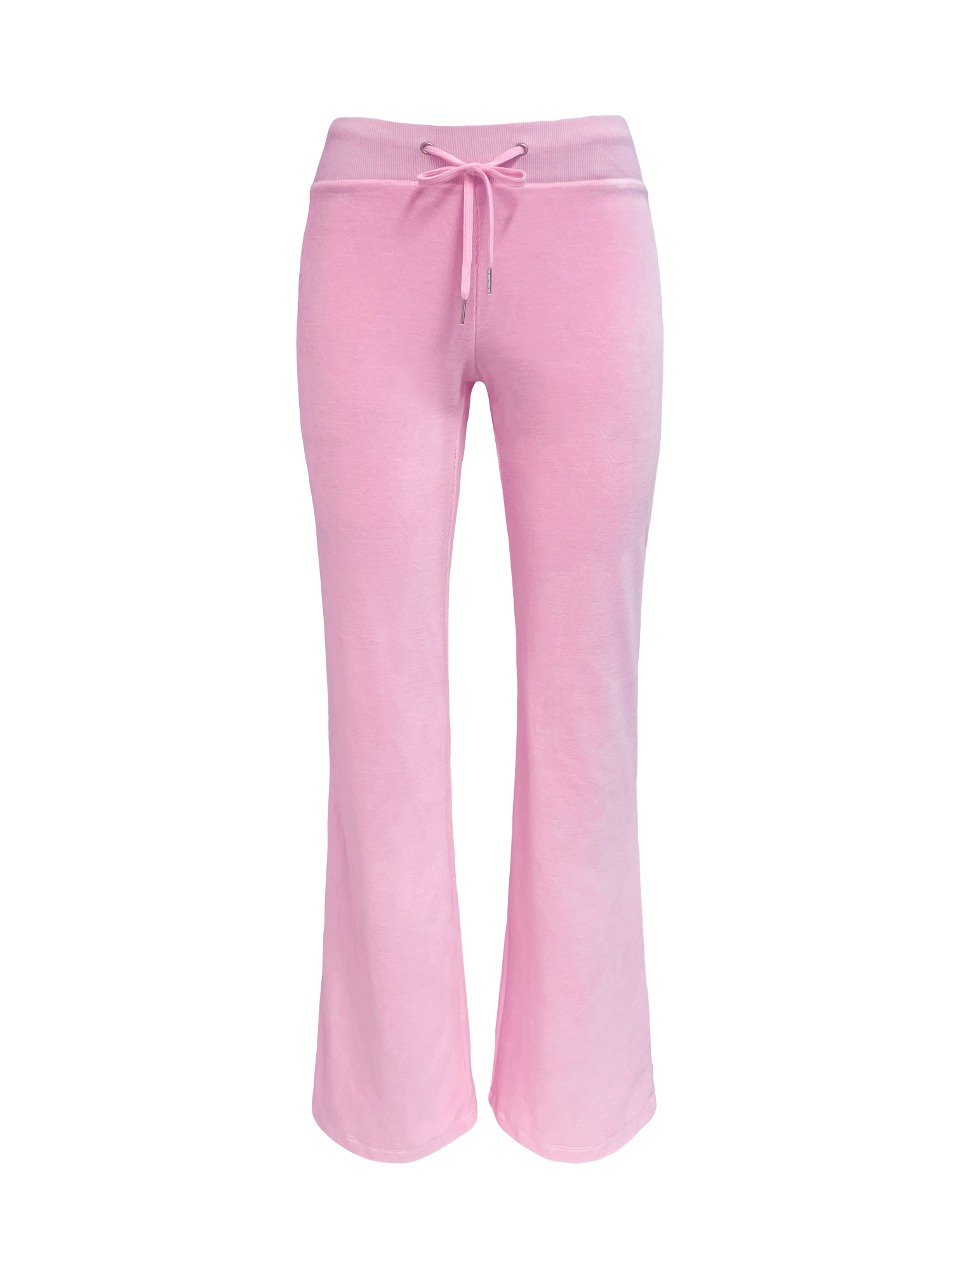 SIGNATURE VELVET TRACKPANTS BABY PINK